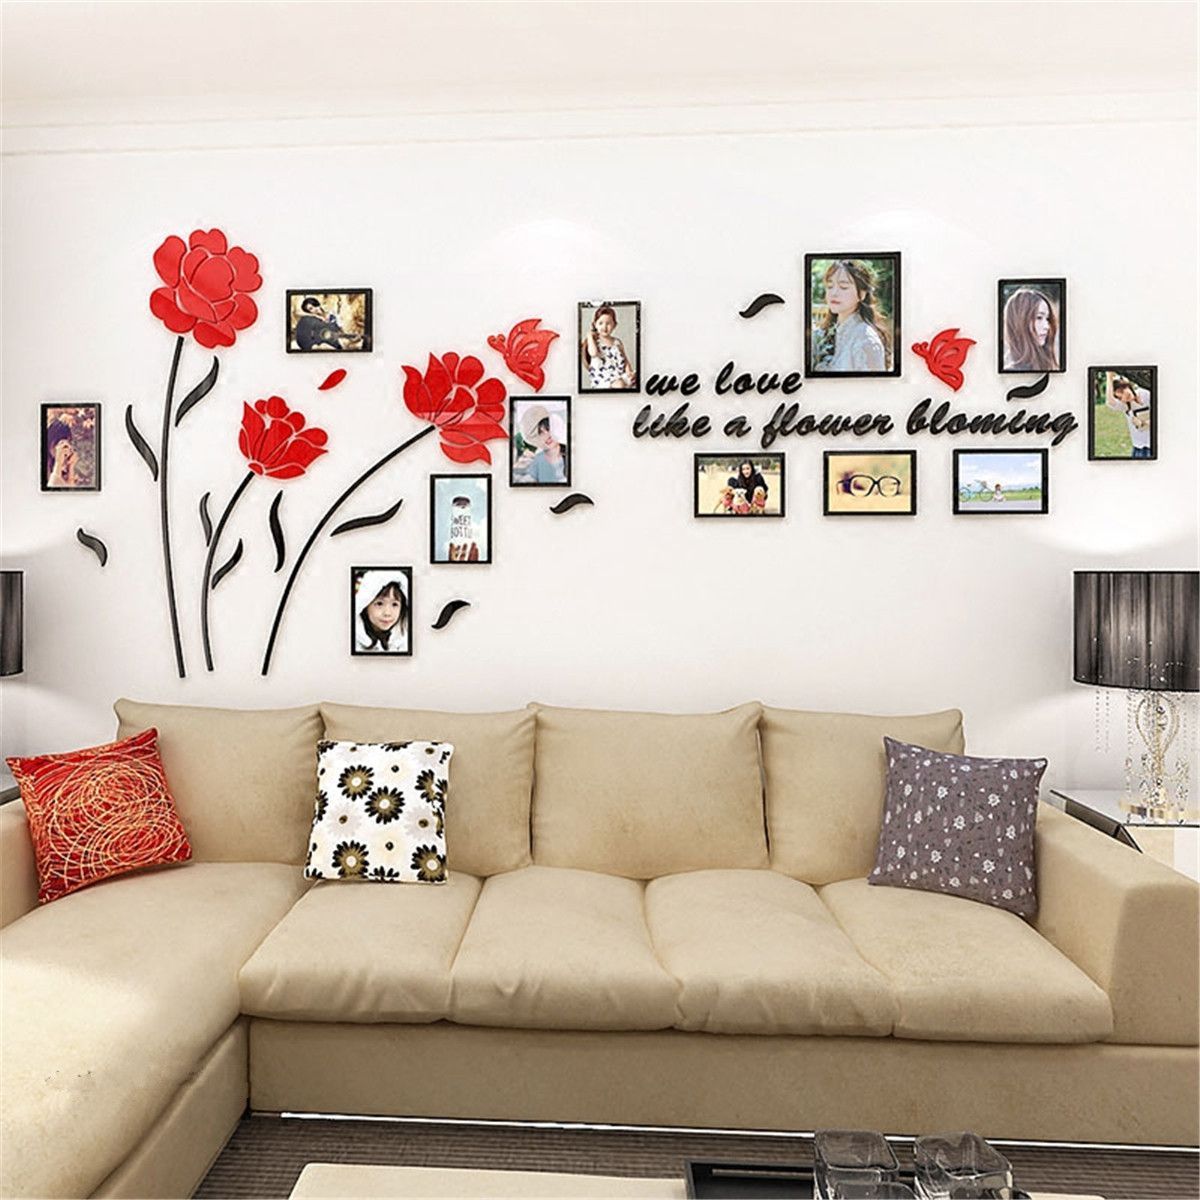 3D-Acrylic-Family-Photo-Picture-Frame-Wall-Sticker-Art-Background-Home-Decor-1478811